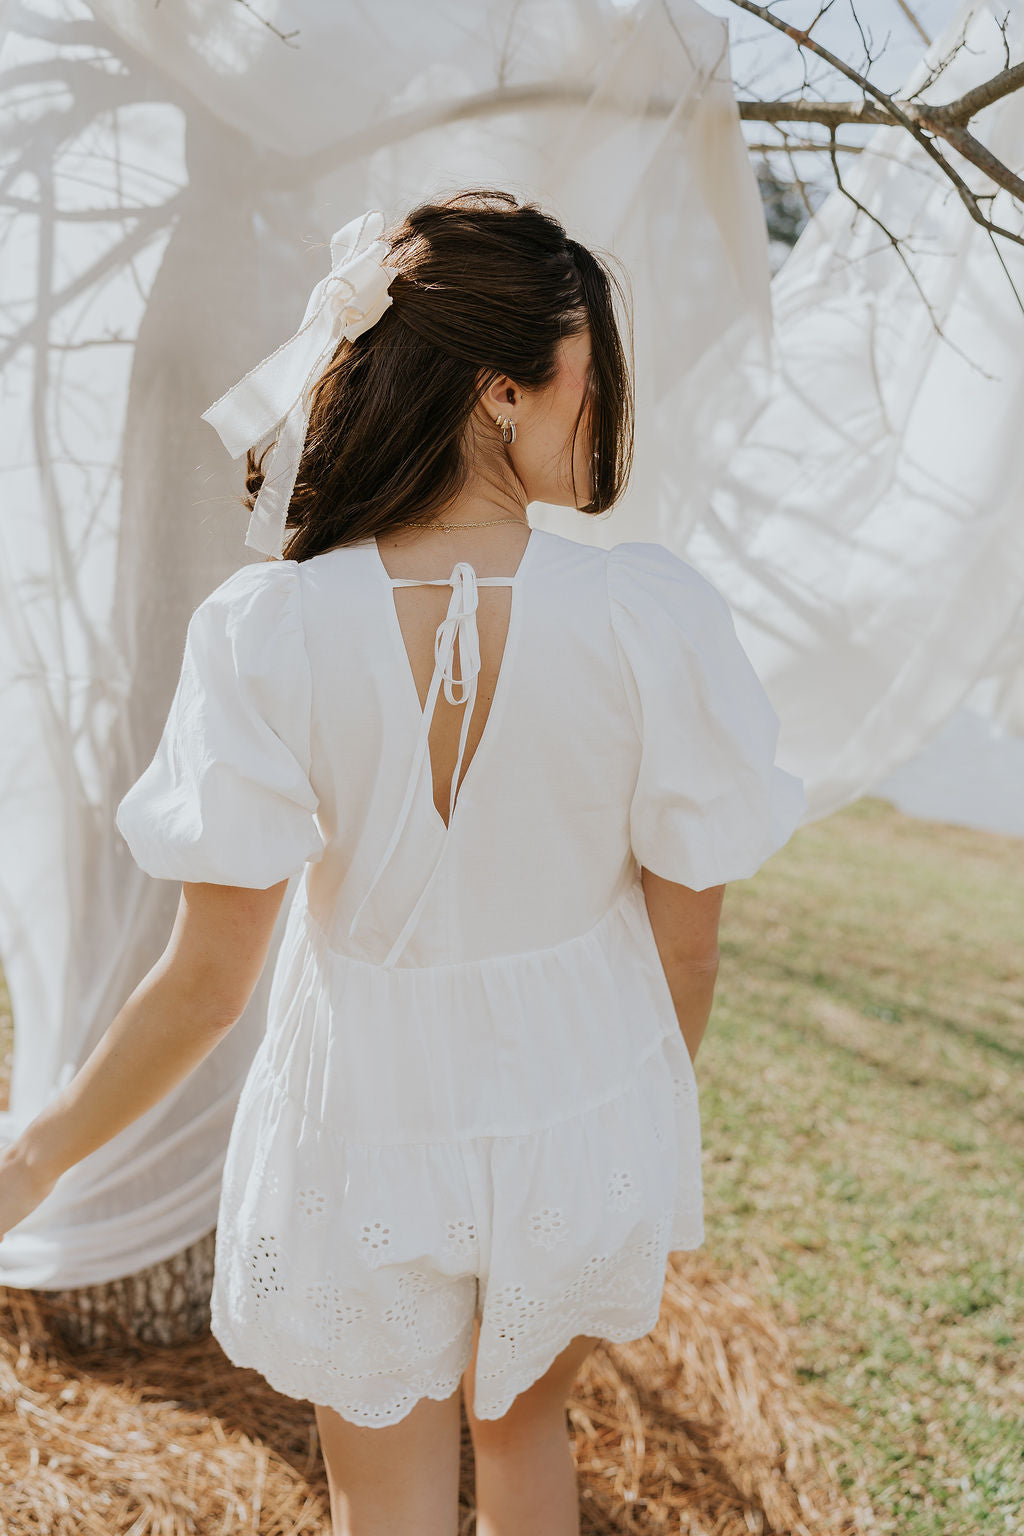 Back view of female model wearing the Madeline White Eyelet Romper that has white fabric with eyelet details, short puff sleeves, a vneck, and a keyhole back with a tie.